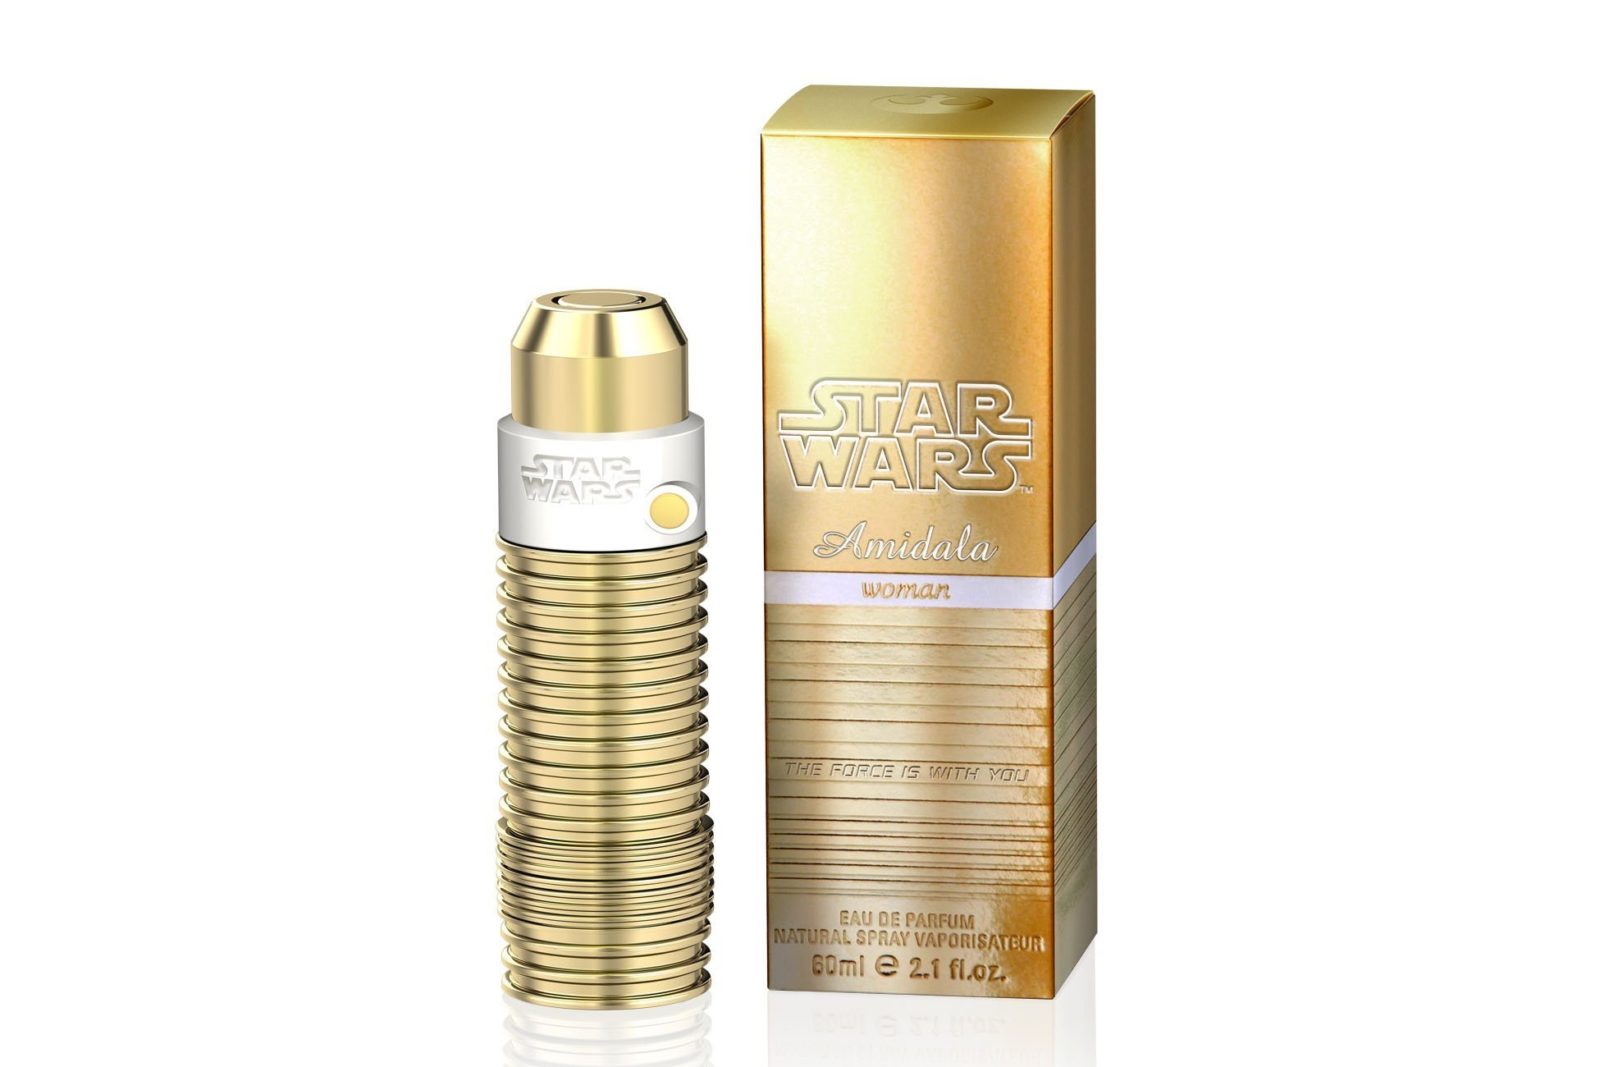 Star Wars Lifestyle Perfumes Available in US